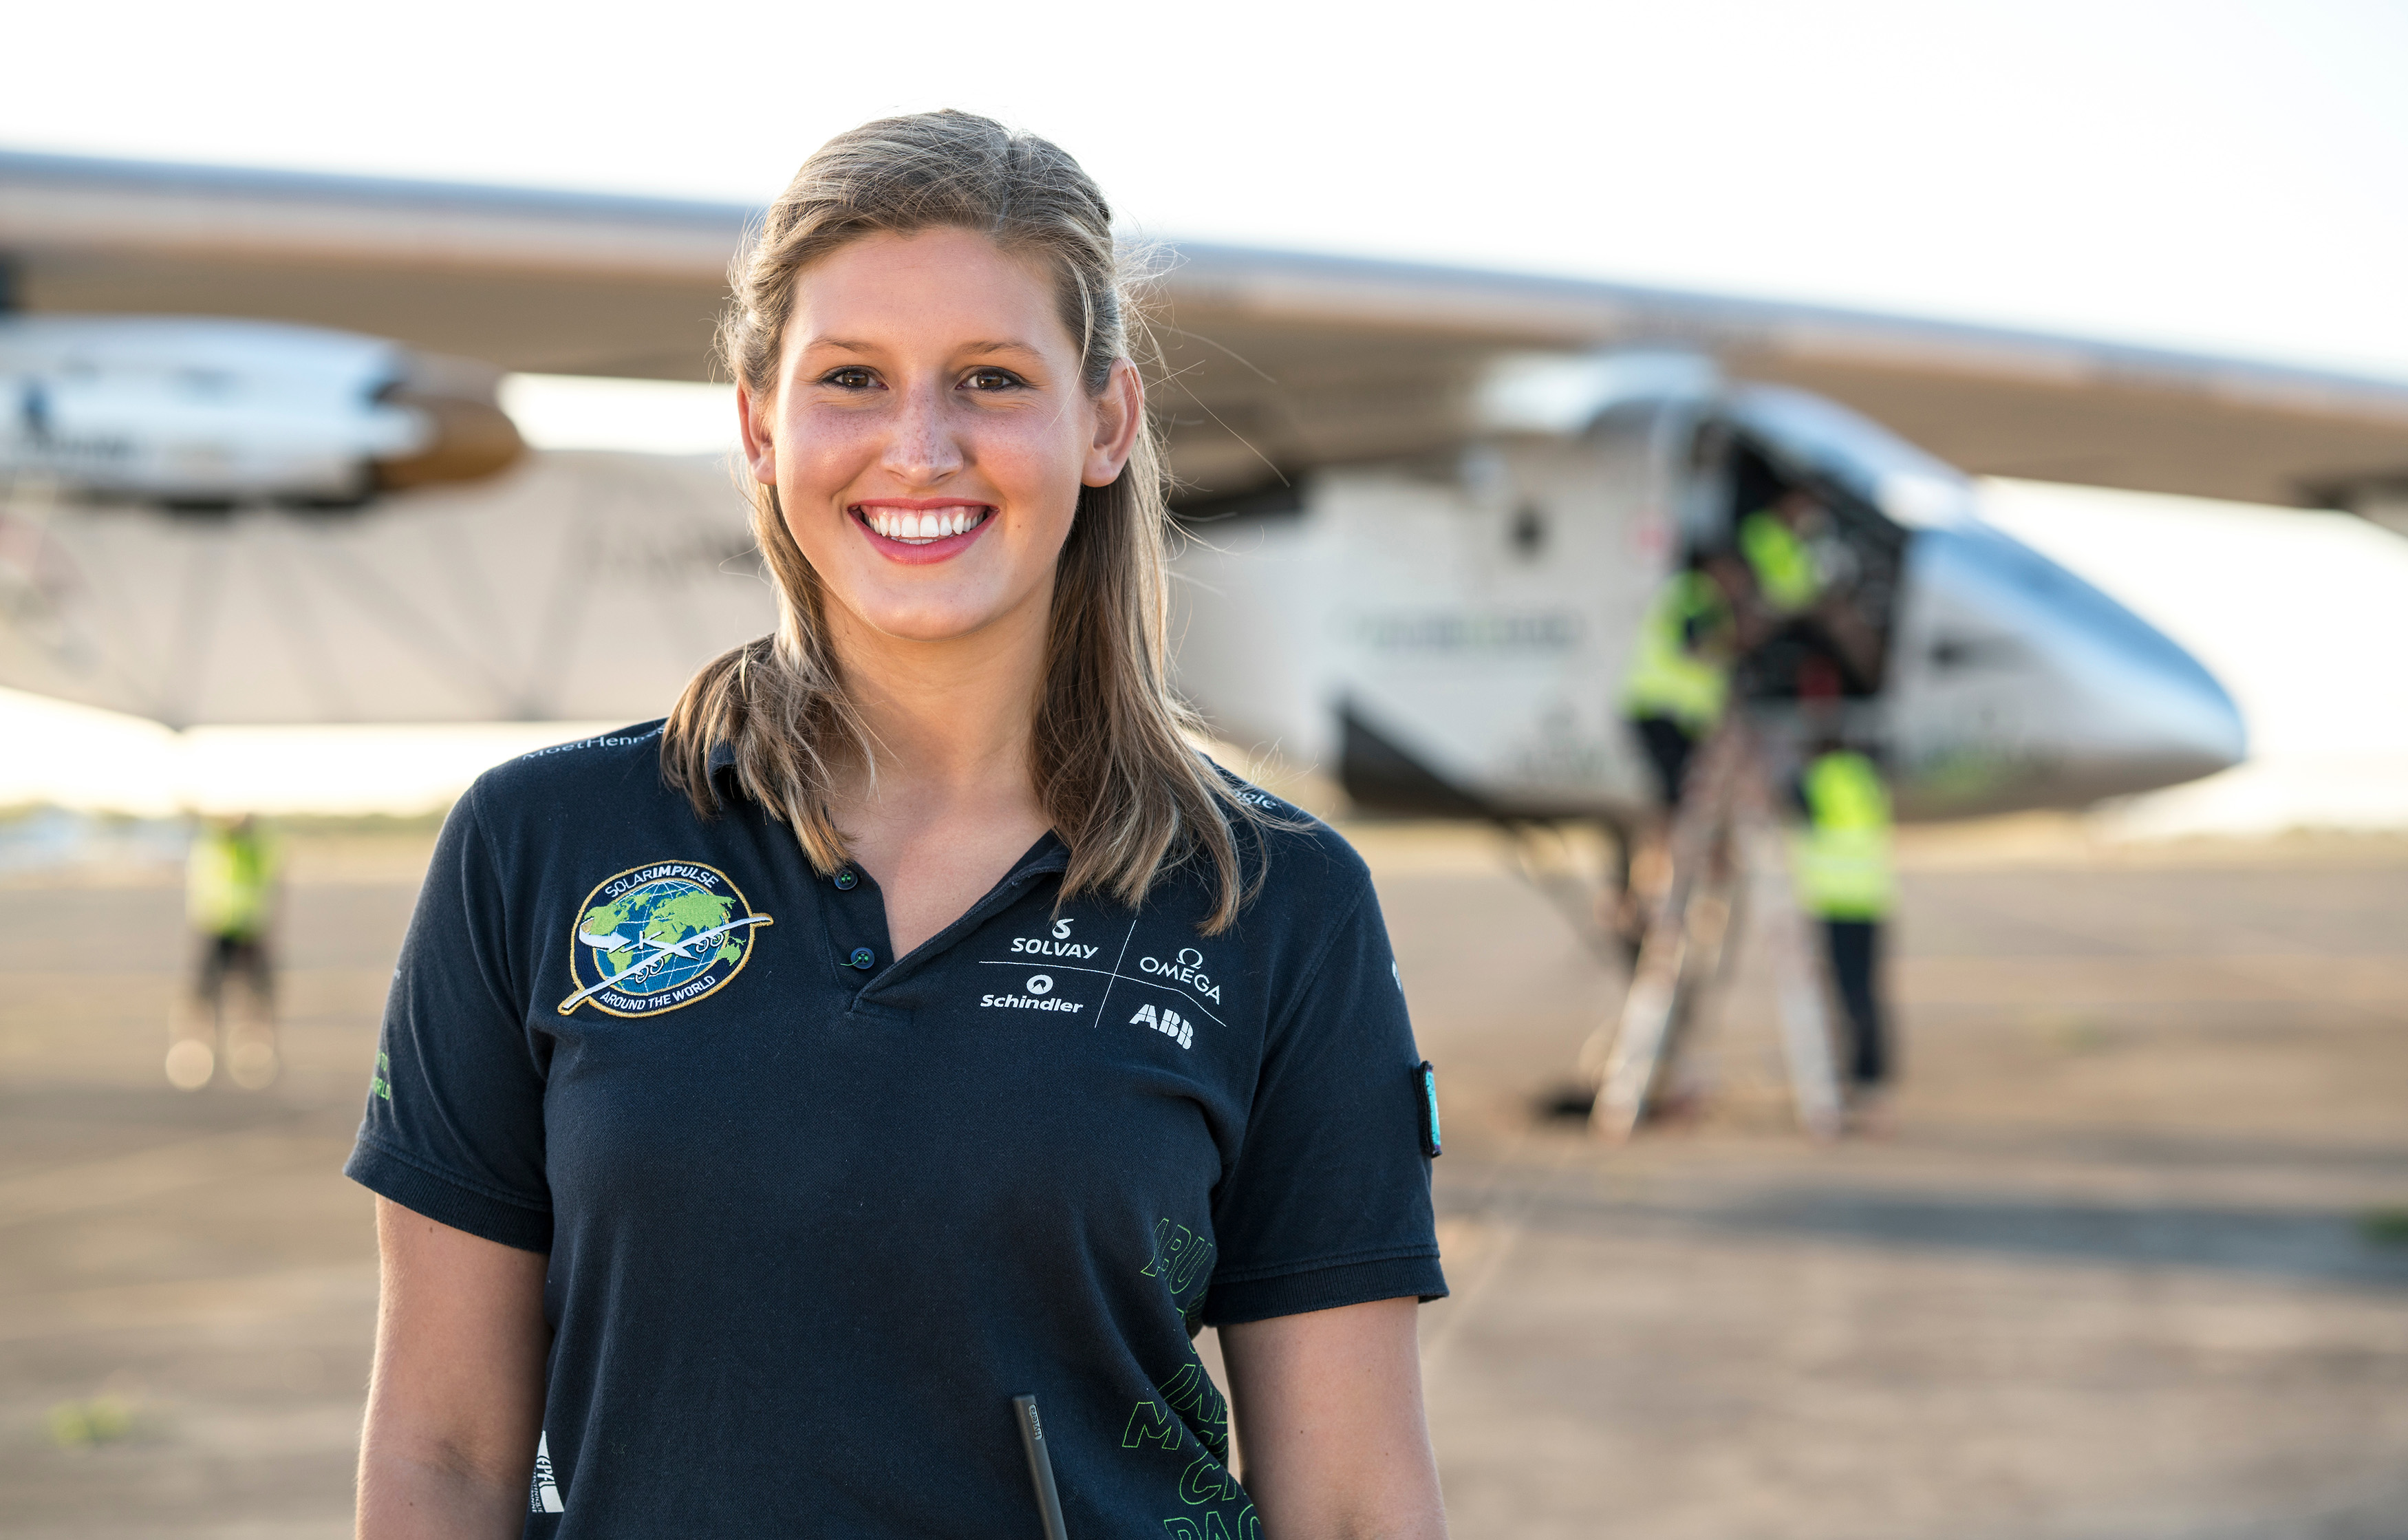 Covestro electrical engineer Paige Kassalen was one of 90 people on the ground-breaking Solar Impulse II team and she was recently named to Forbes '30 Under 30' Class of 2017 in Energy. Photo courtesy of Jean Revellard/Rezo